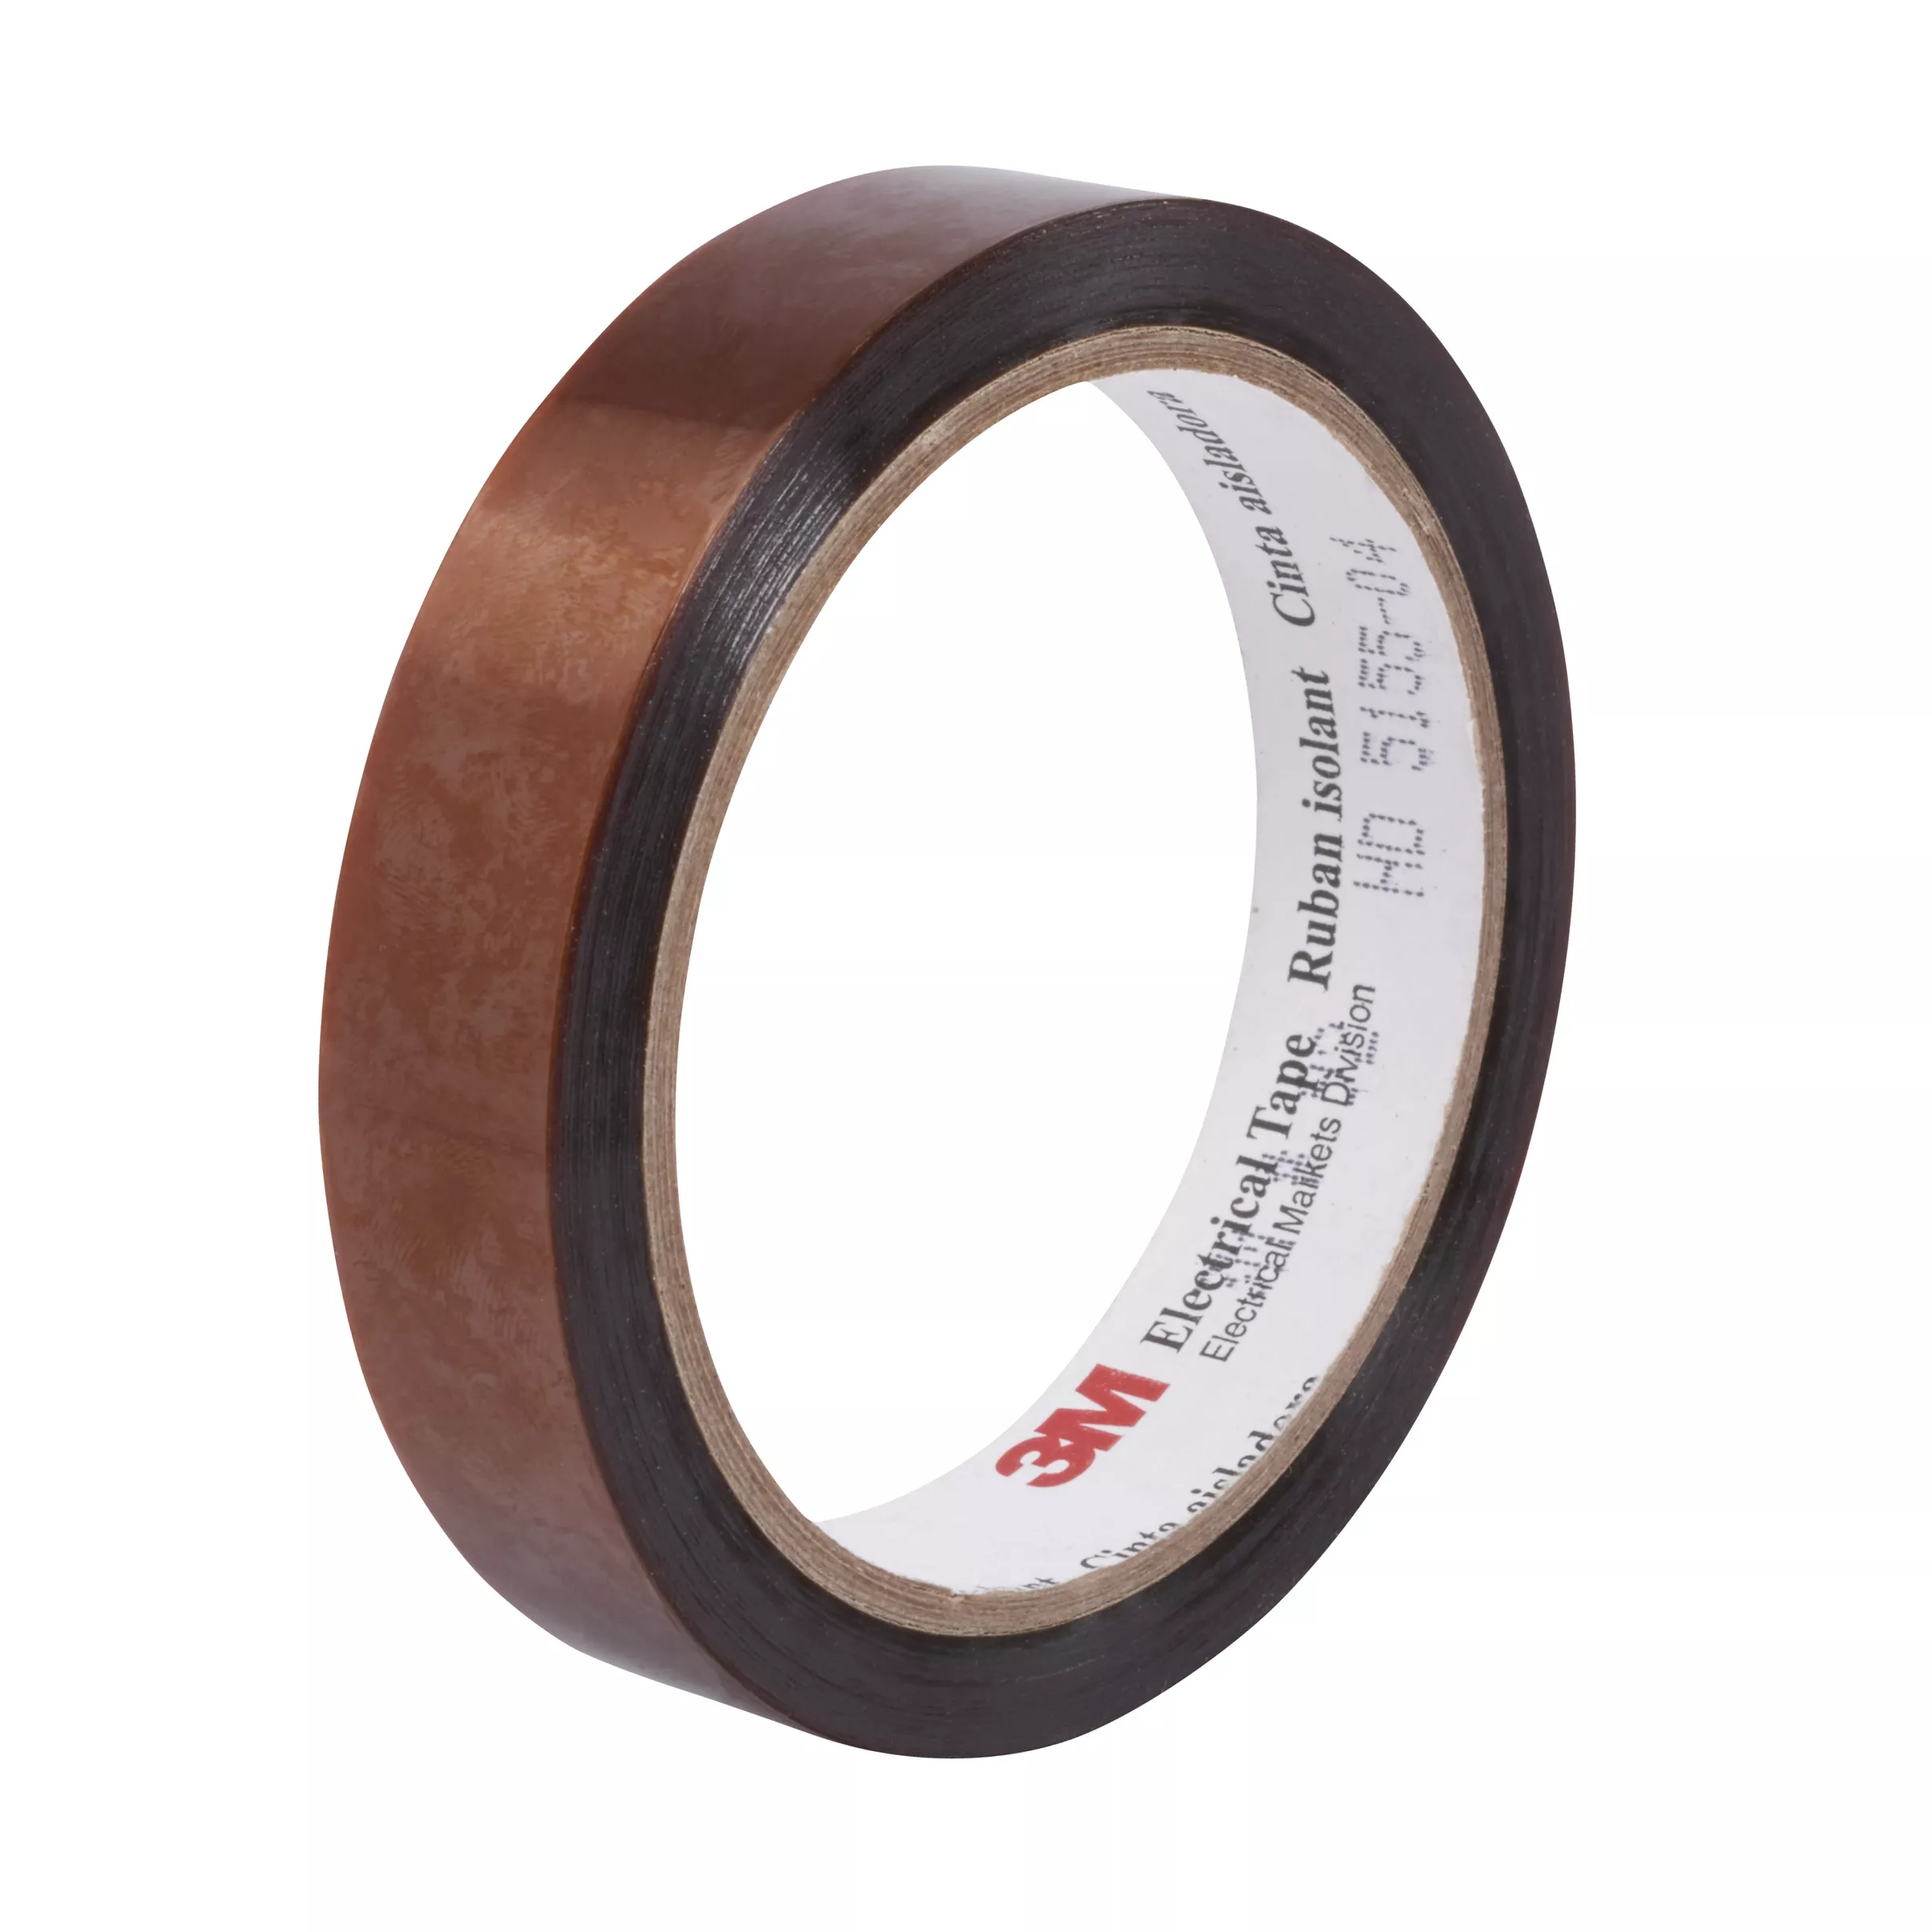 SKU 7010395787 | 3M™ Polyimide Film Electrical Tape 92